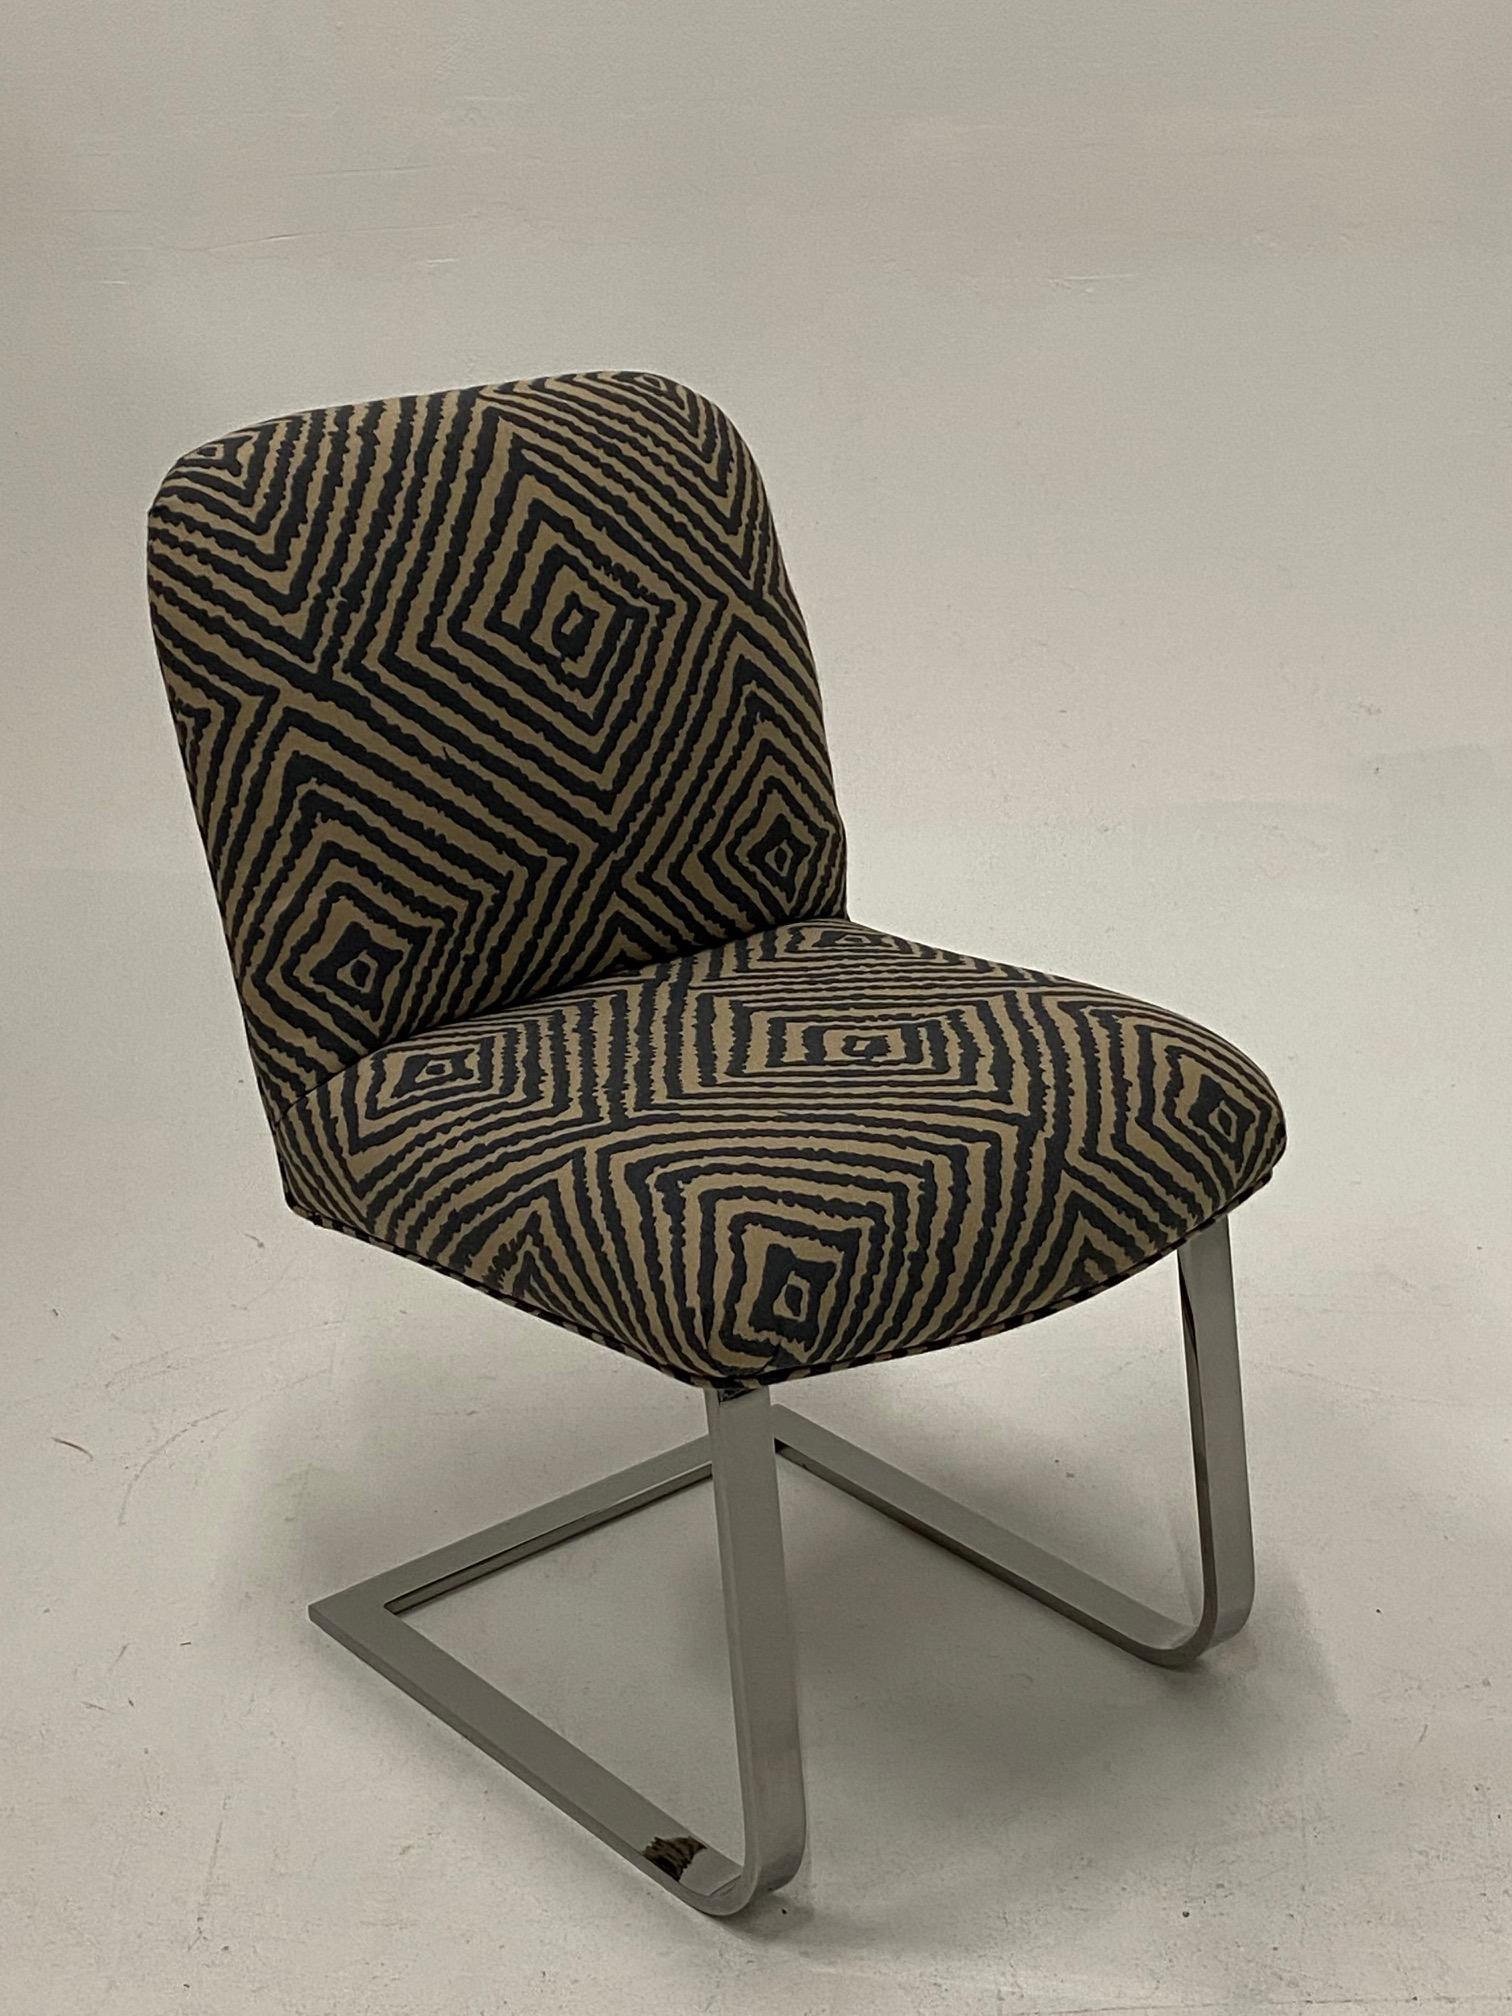 Great looking side or desk chair by Knoll having sleek chrome base and new taupe and black geometric upholstery appropriate to the era of the chair.